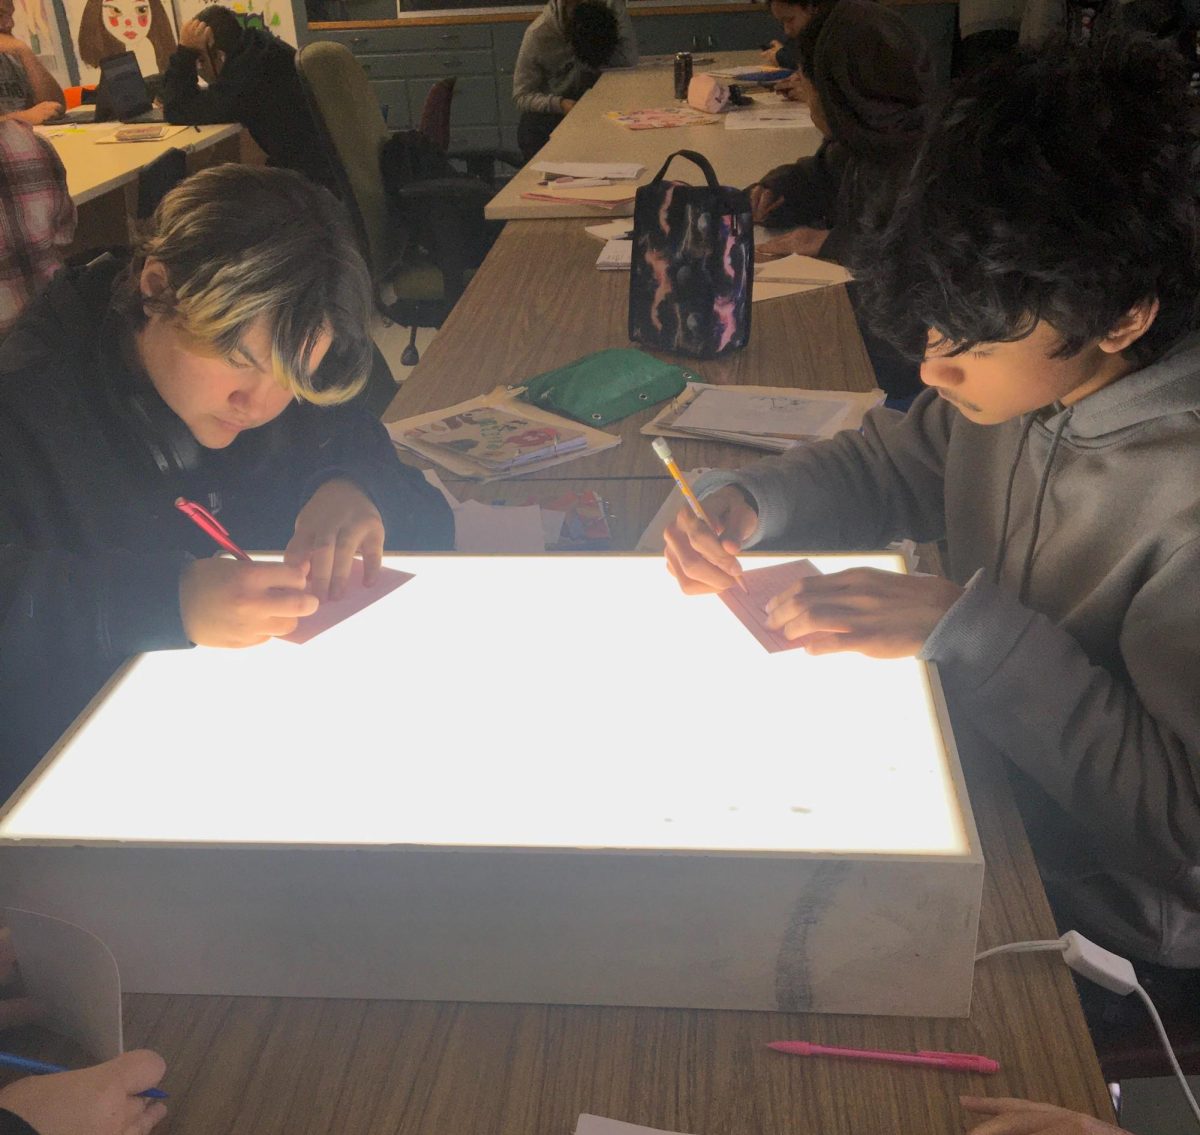 FHS students learn animation skills through creation of flipbook project